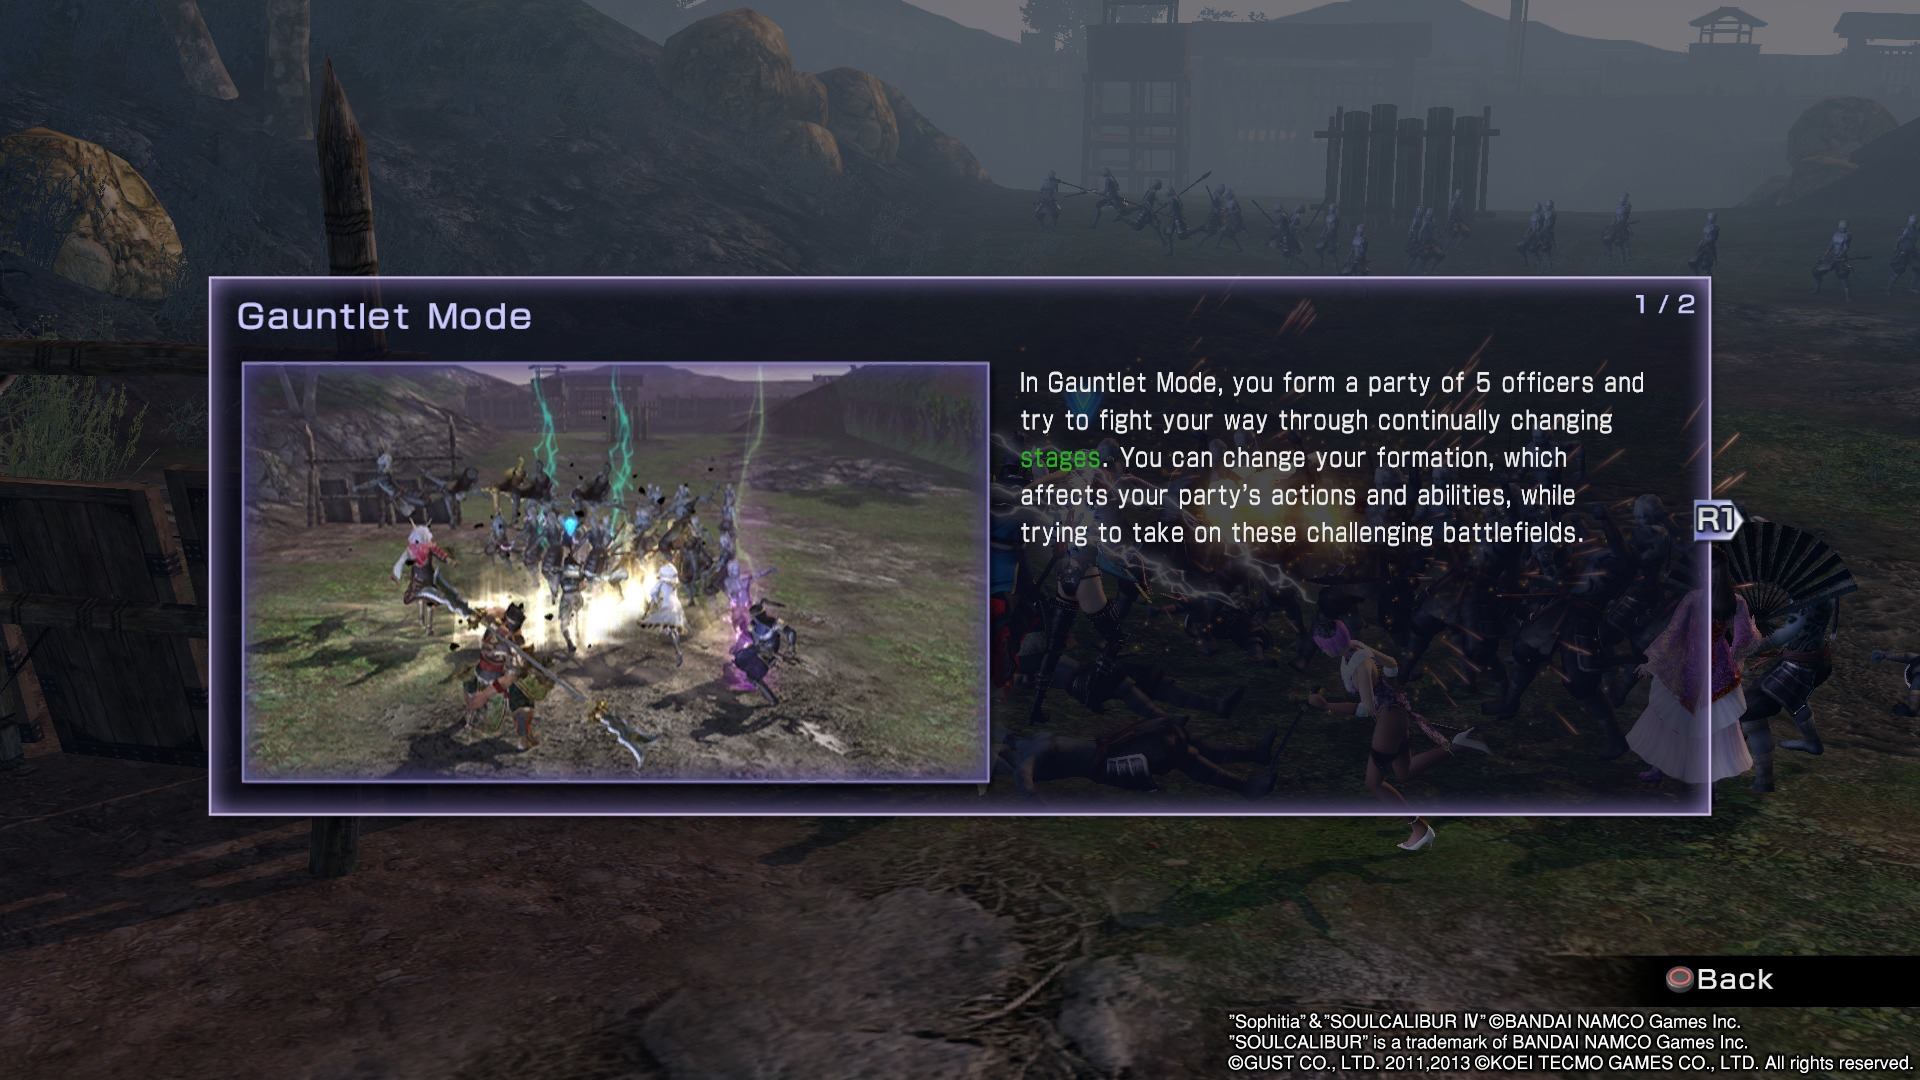 Warriors Orochi 3 Ultimate Gauntlet Mode Introduction